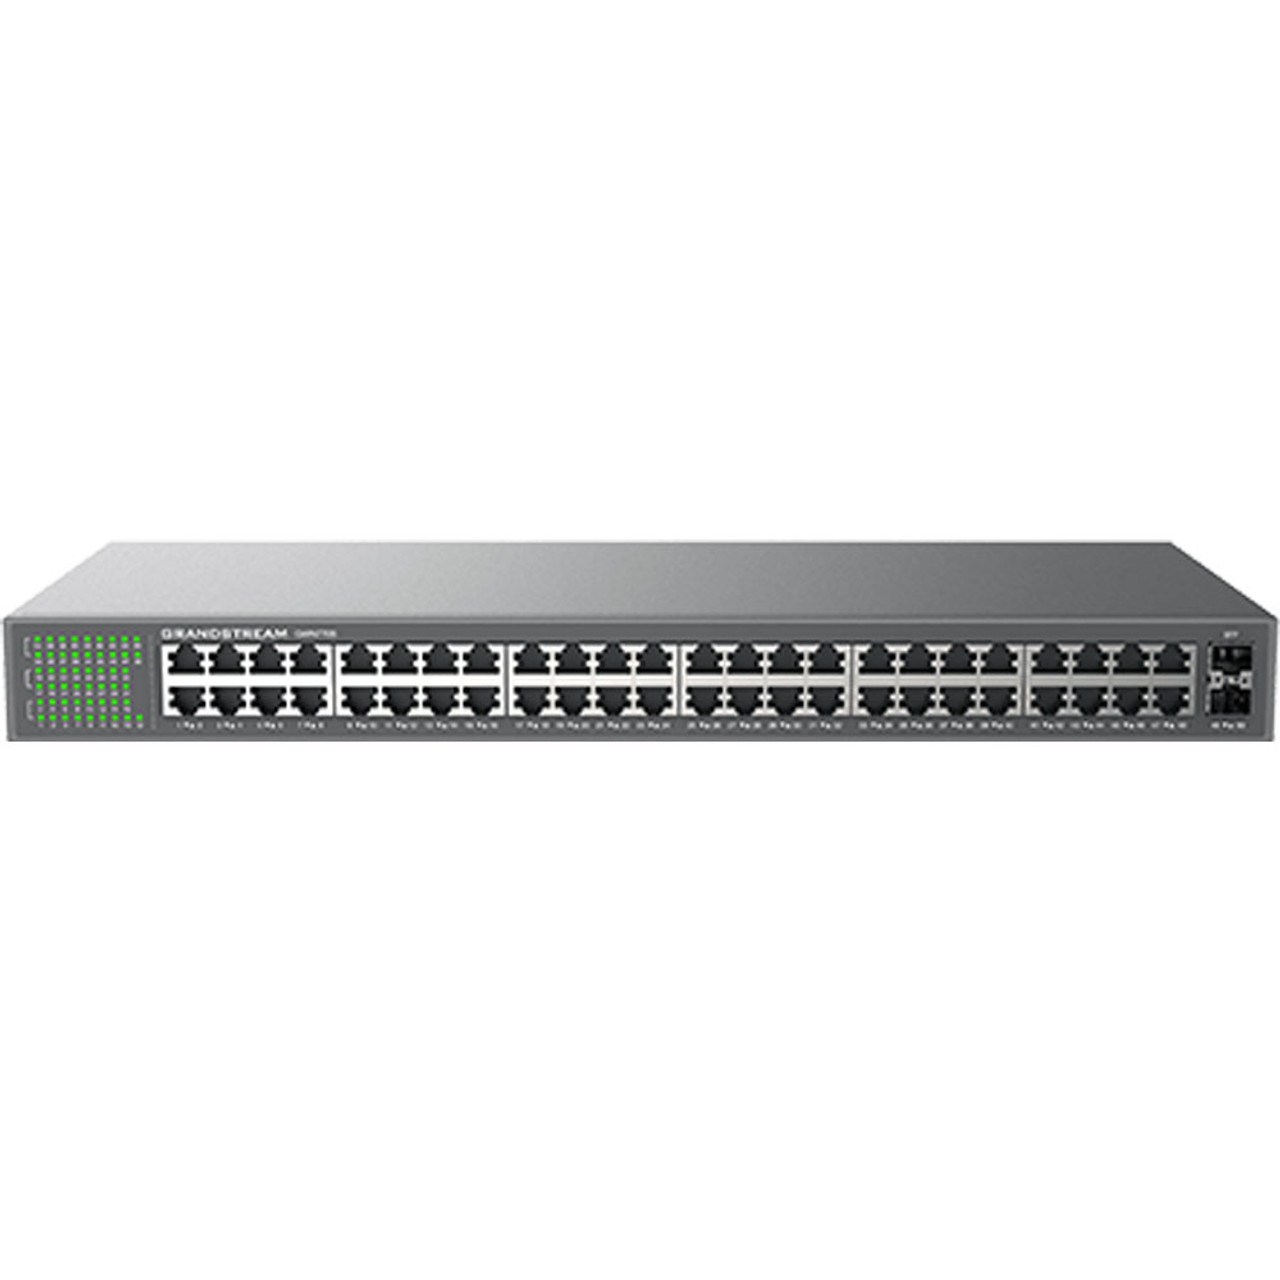 Grandstream GWN7706 Unmanaged Network Switch - IP Phone Warehouse